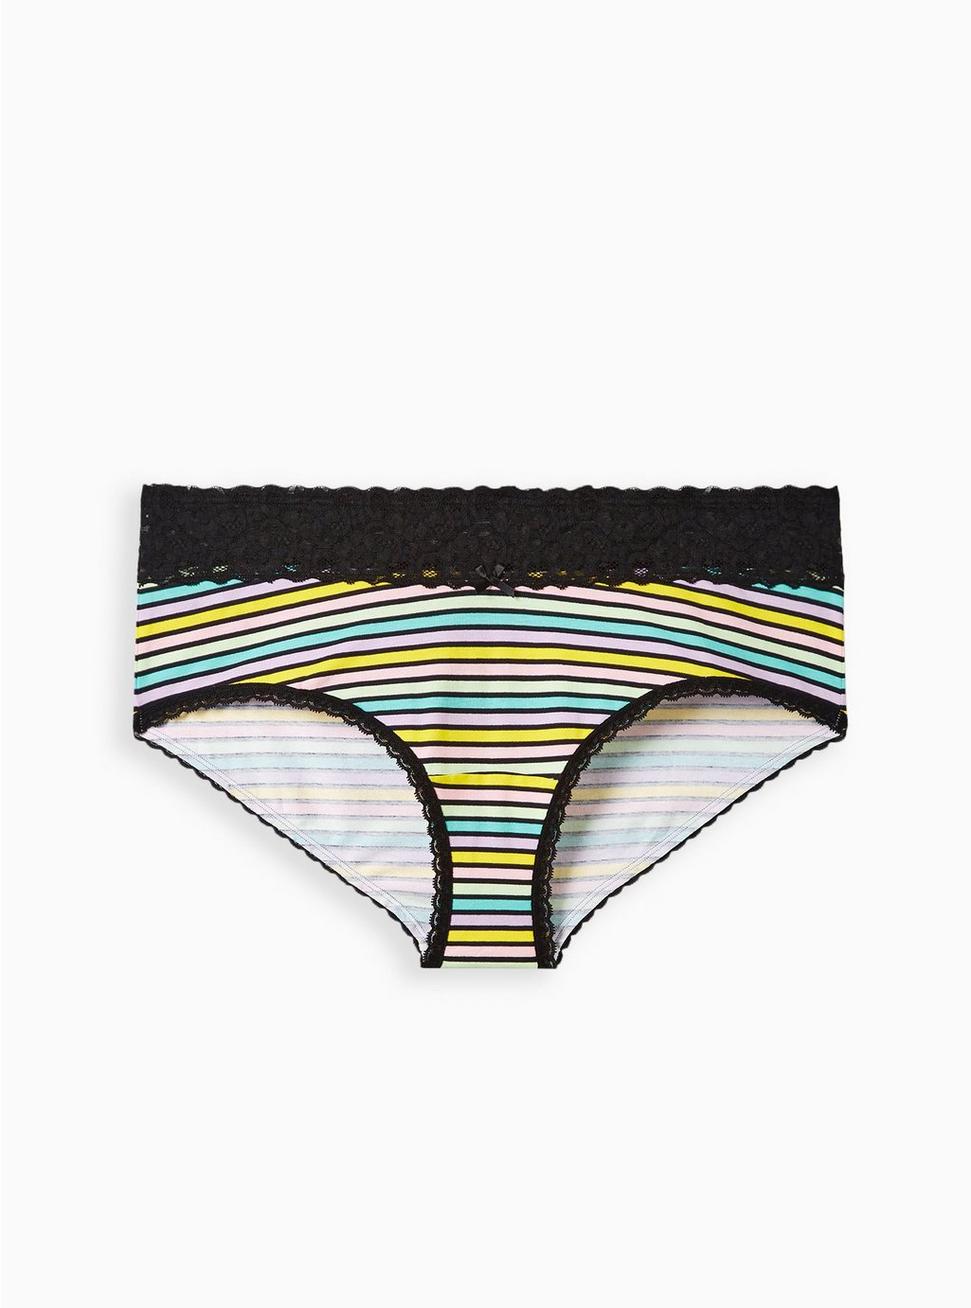 Cotton Mid-Rise Cheeky Lace Trim Panty, RACING STRIPE, hi-res